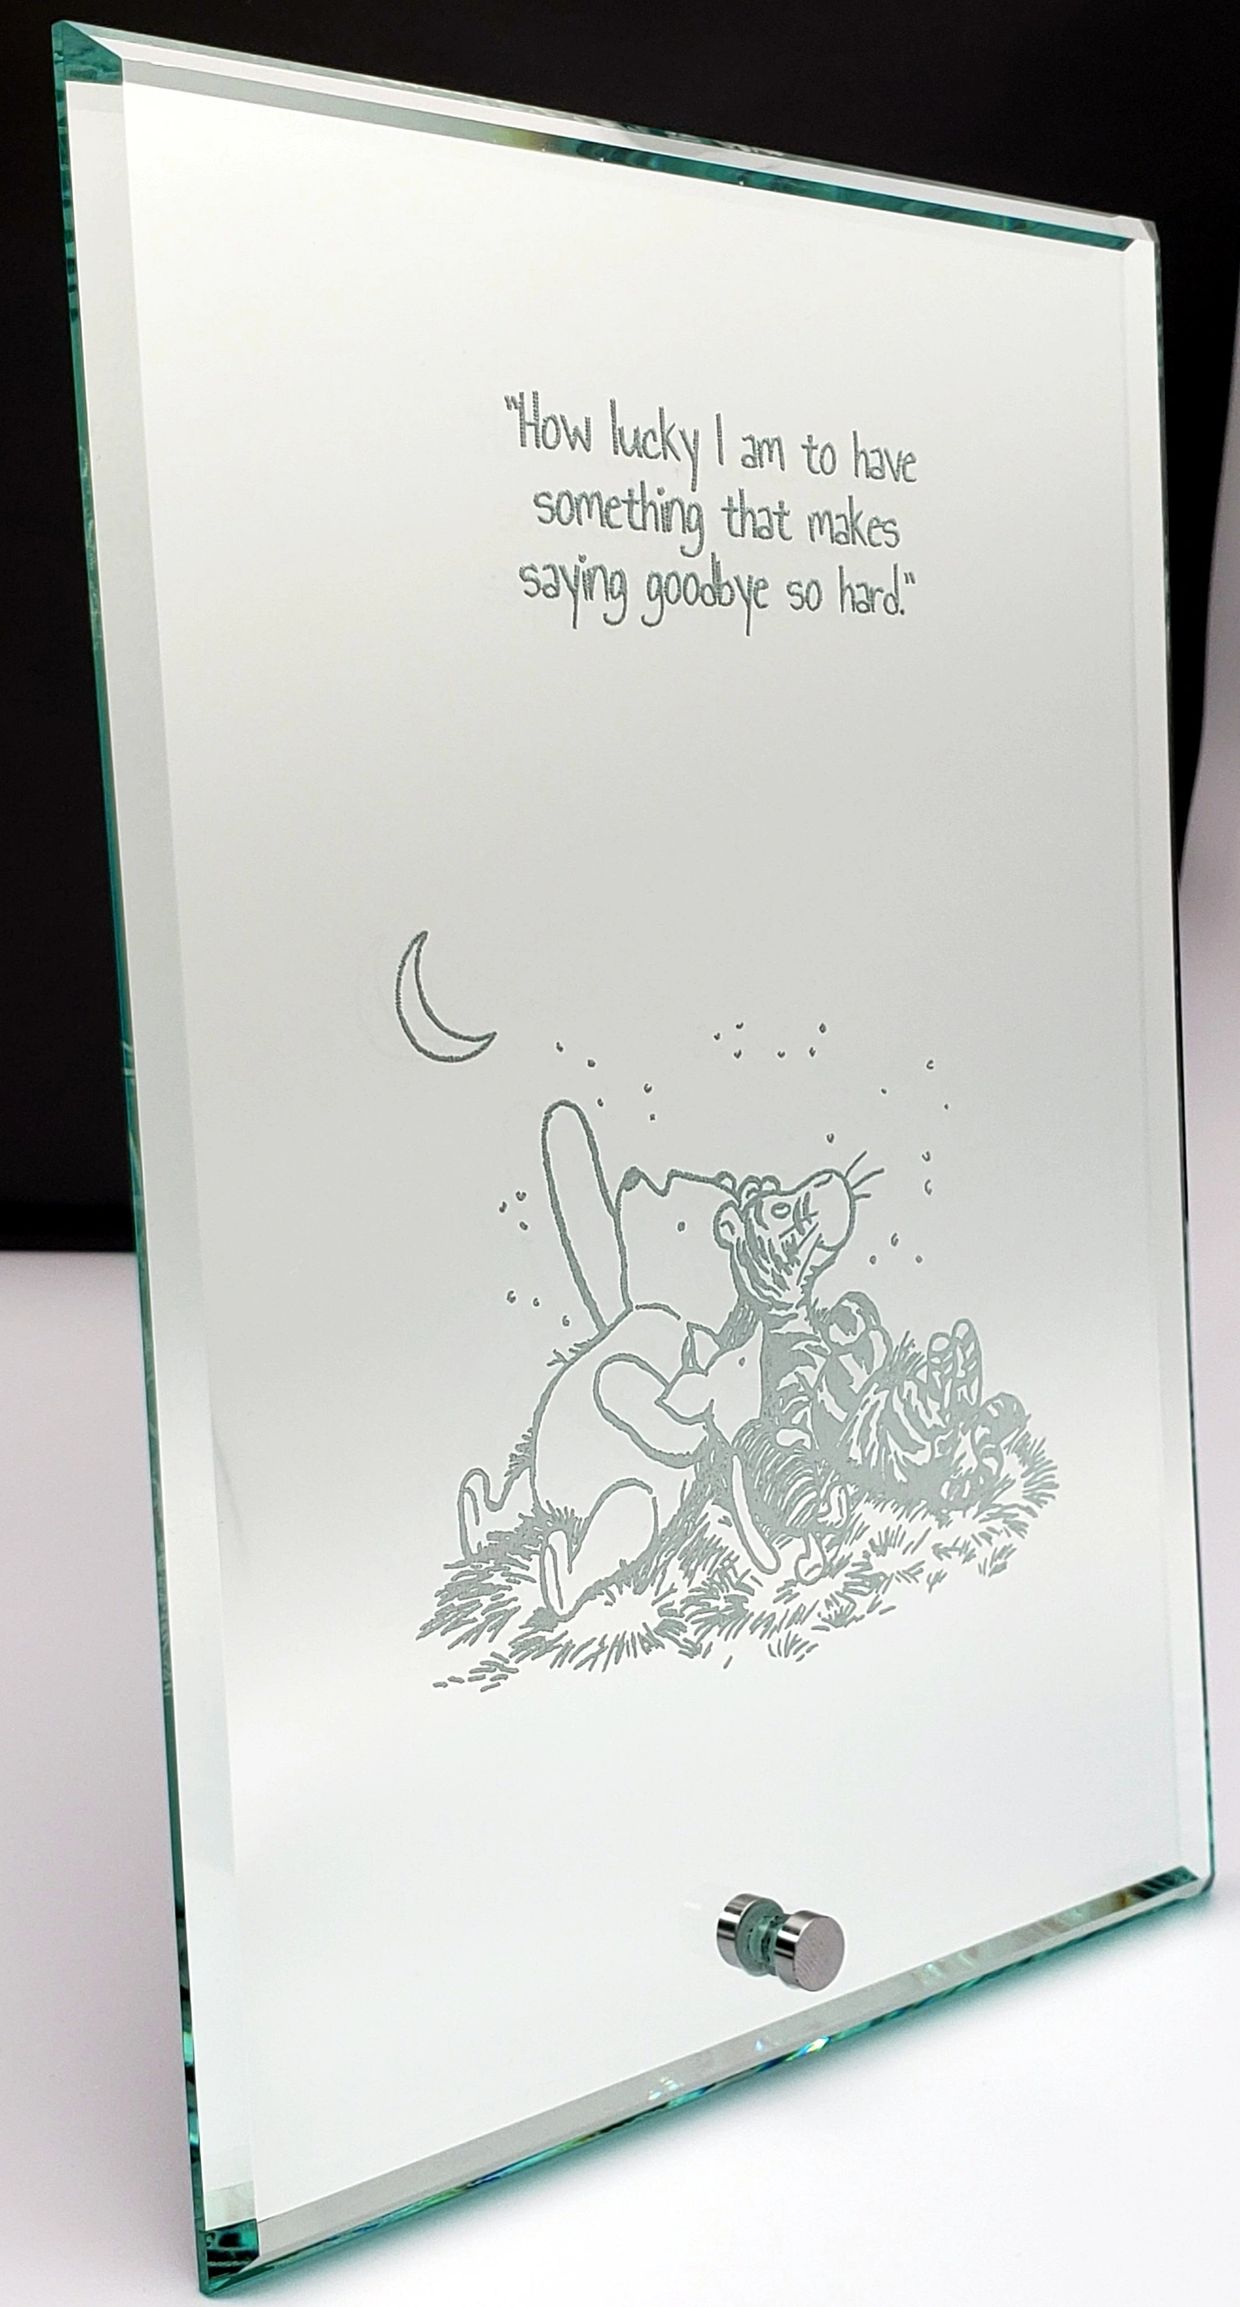 Engraved Winnie the Pooh mirror pooh, tigger and piglet. Mirror is 6 inches wide by 8 inches tall.